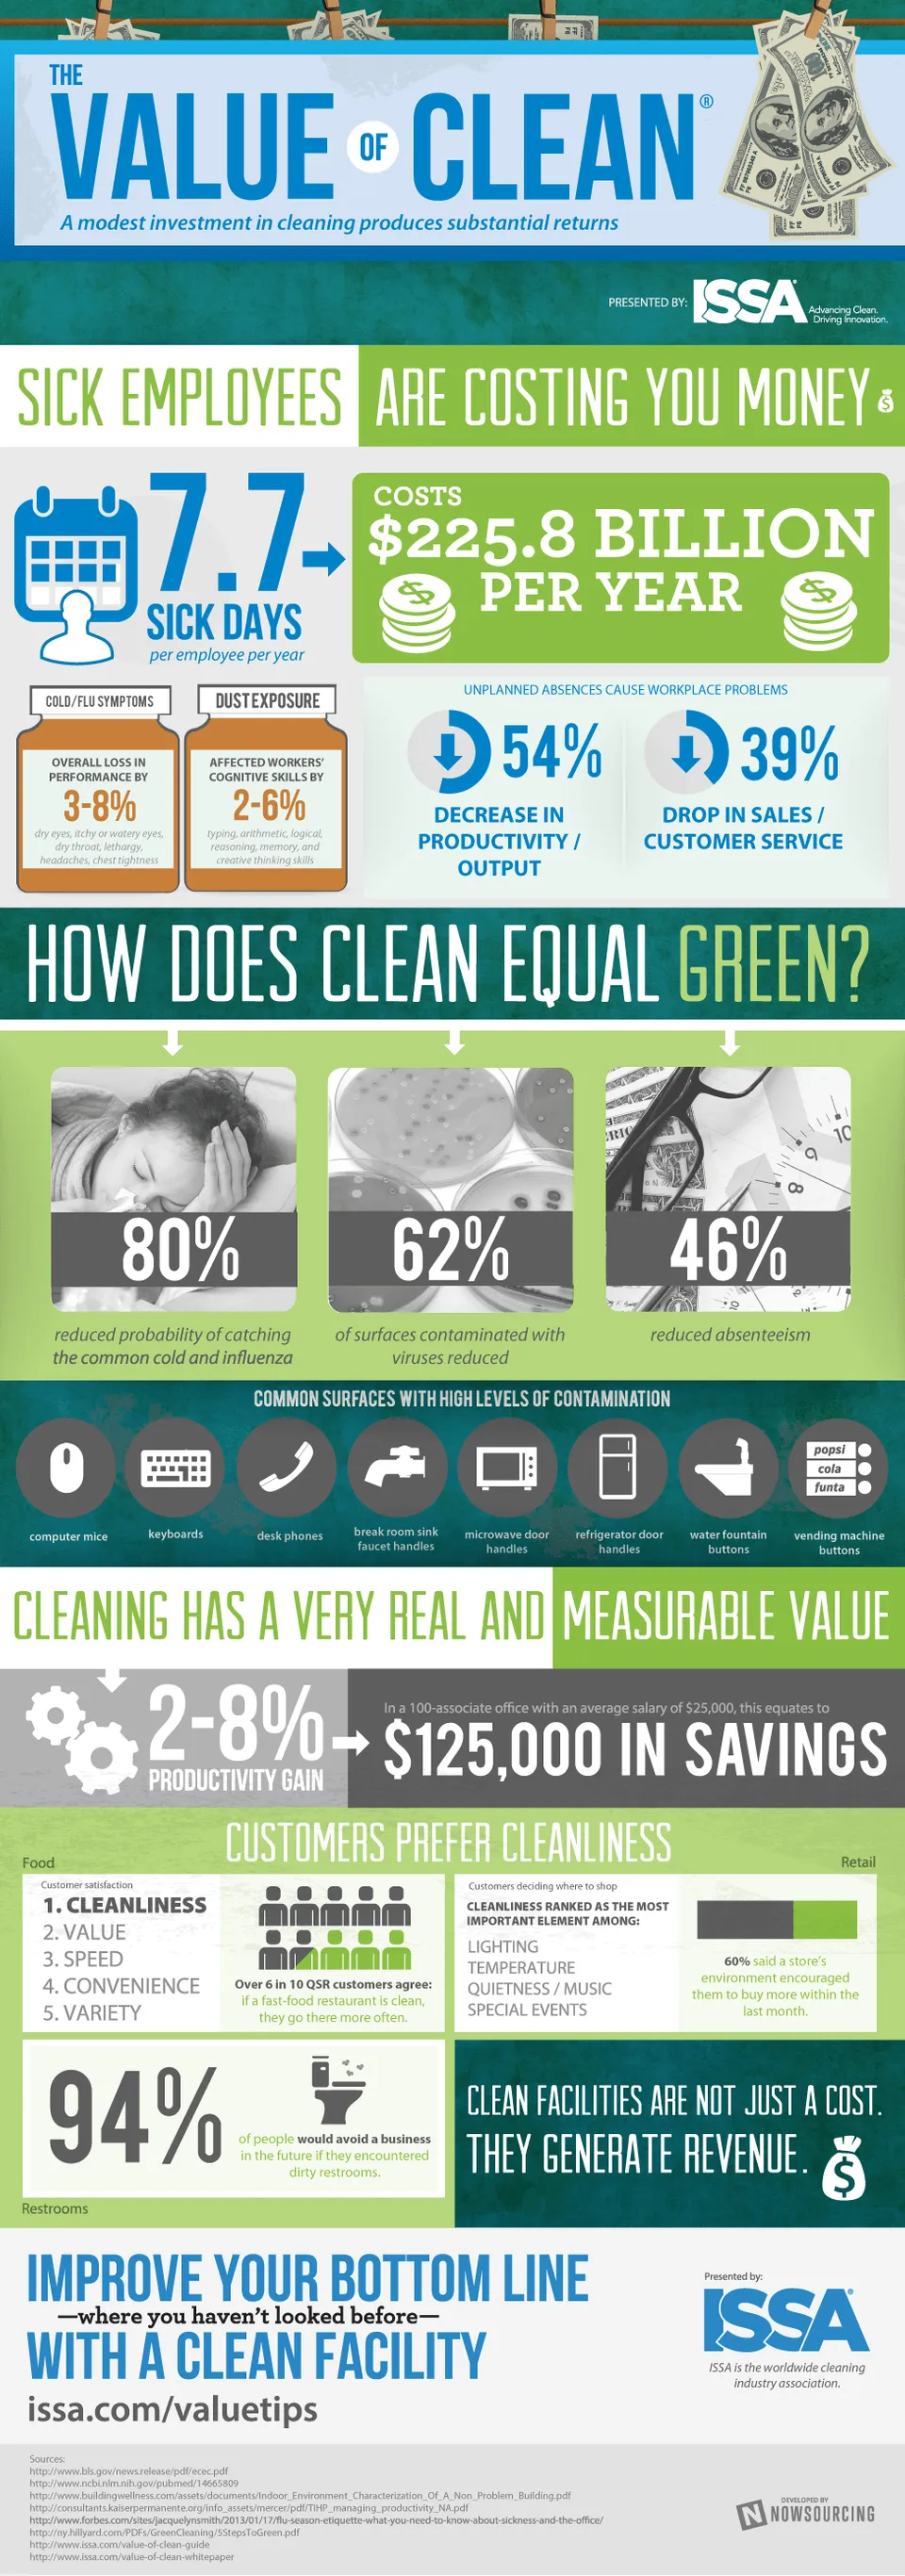 The Value of Clean Infographic